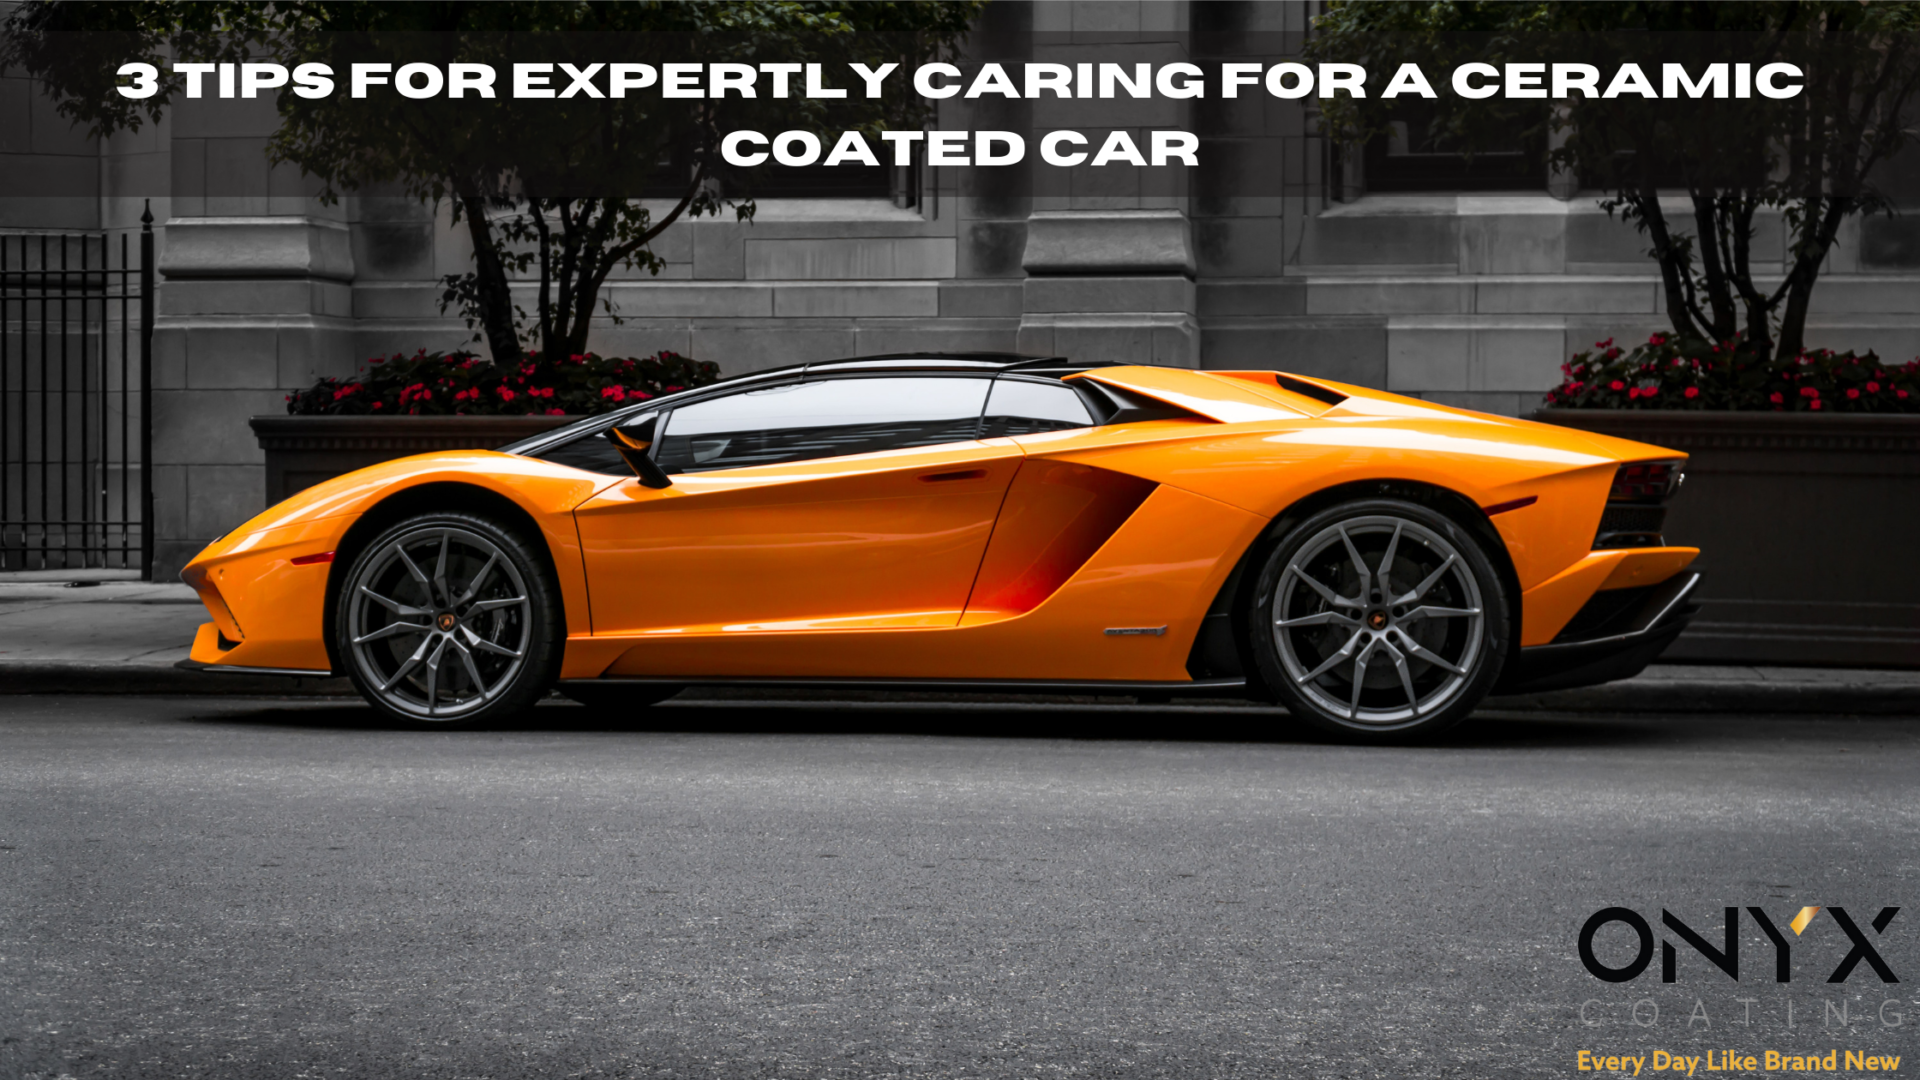 3 tips for expertly caring for a Ceramic Coated car